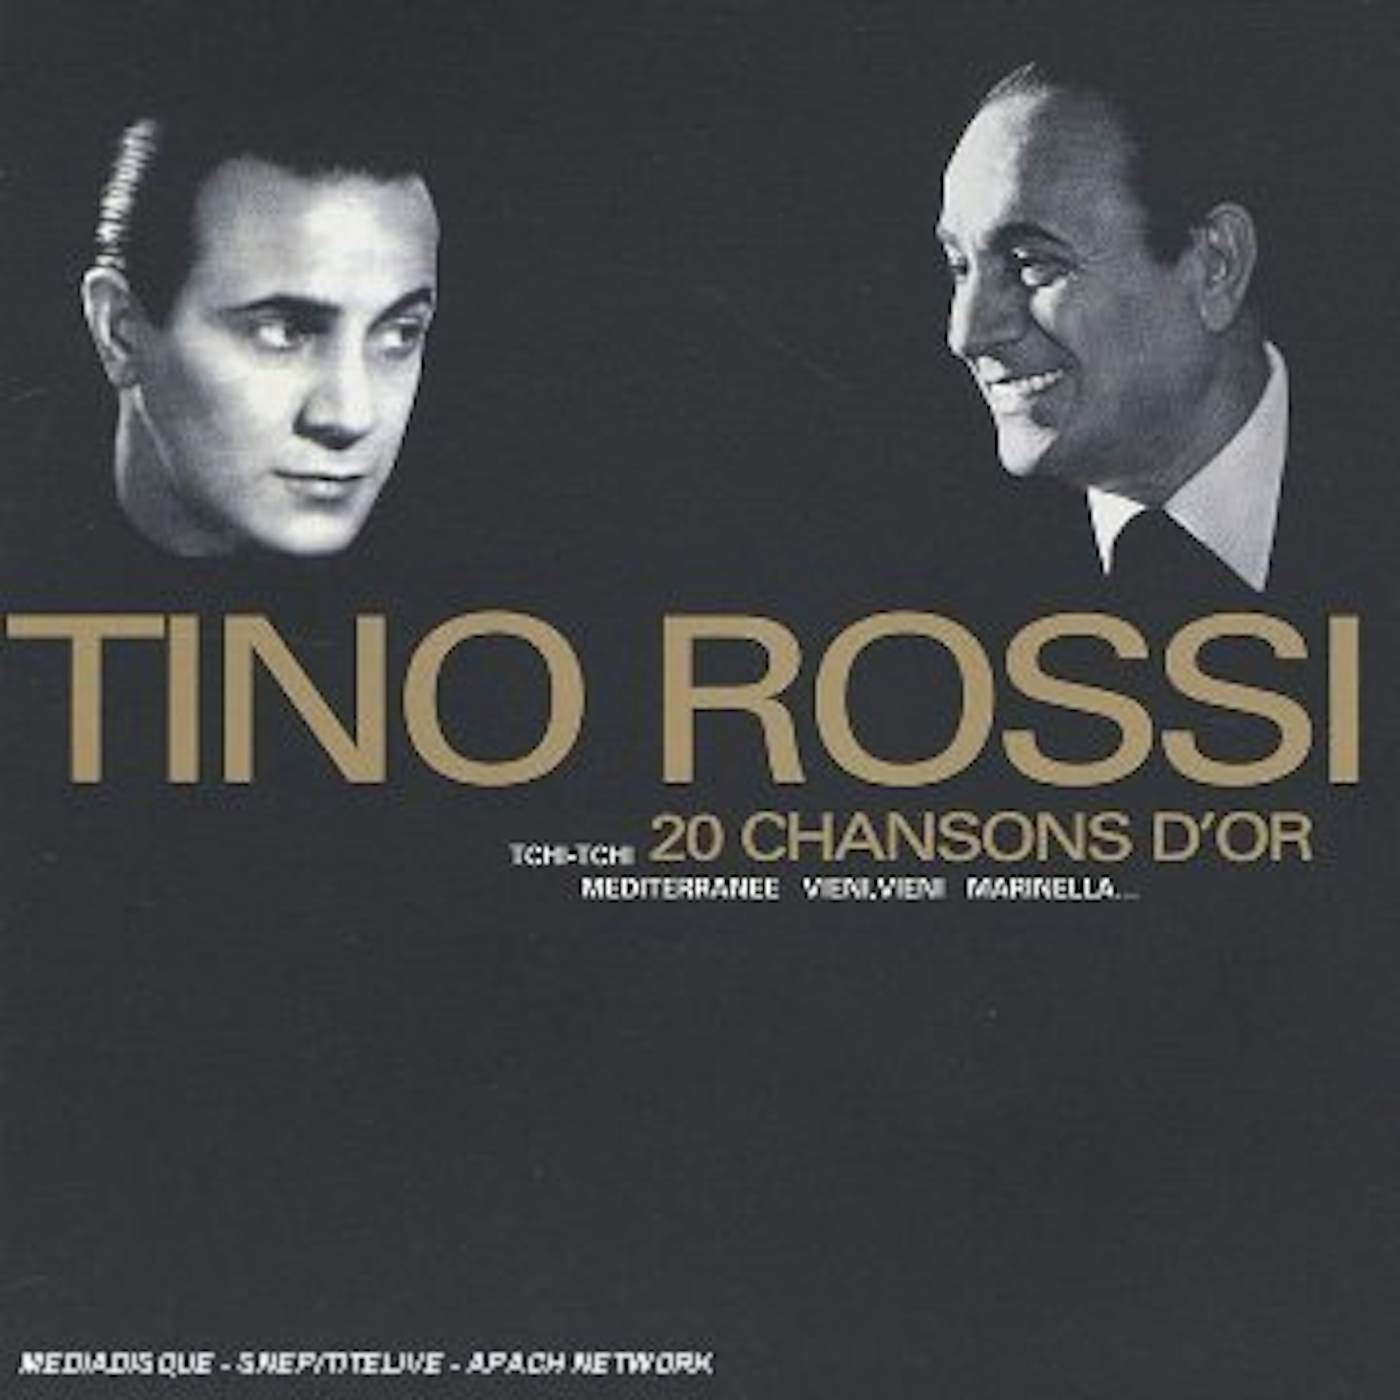 Tino Rossi 20 CHANSONS D'OR CD